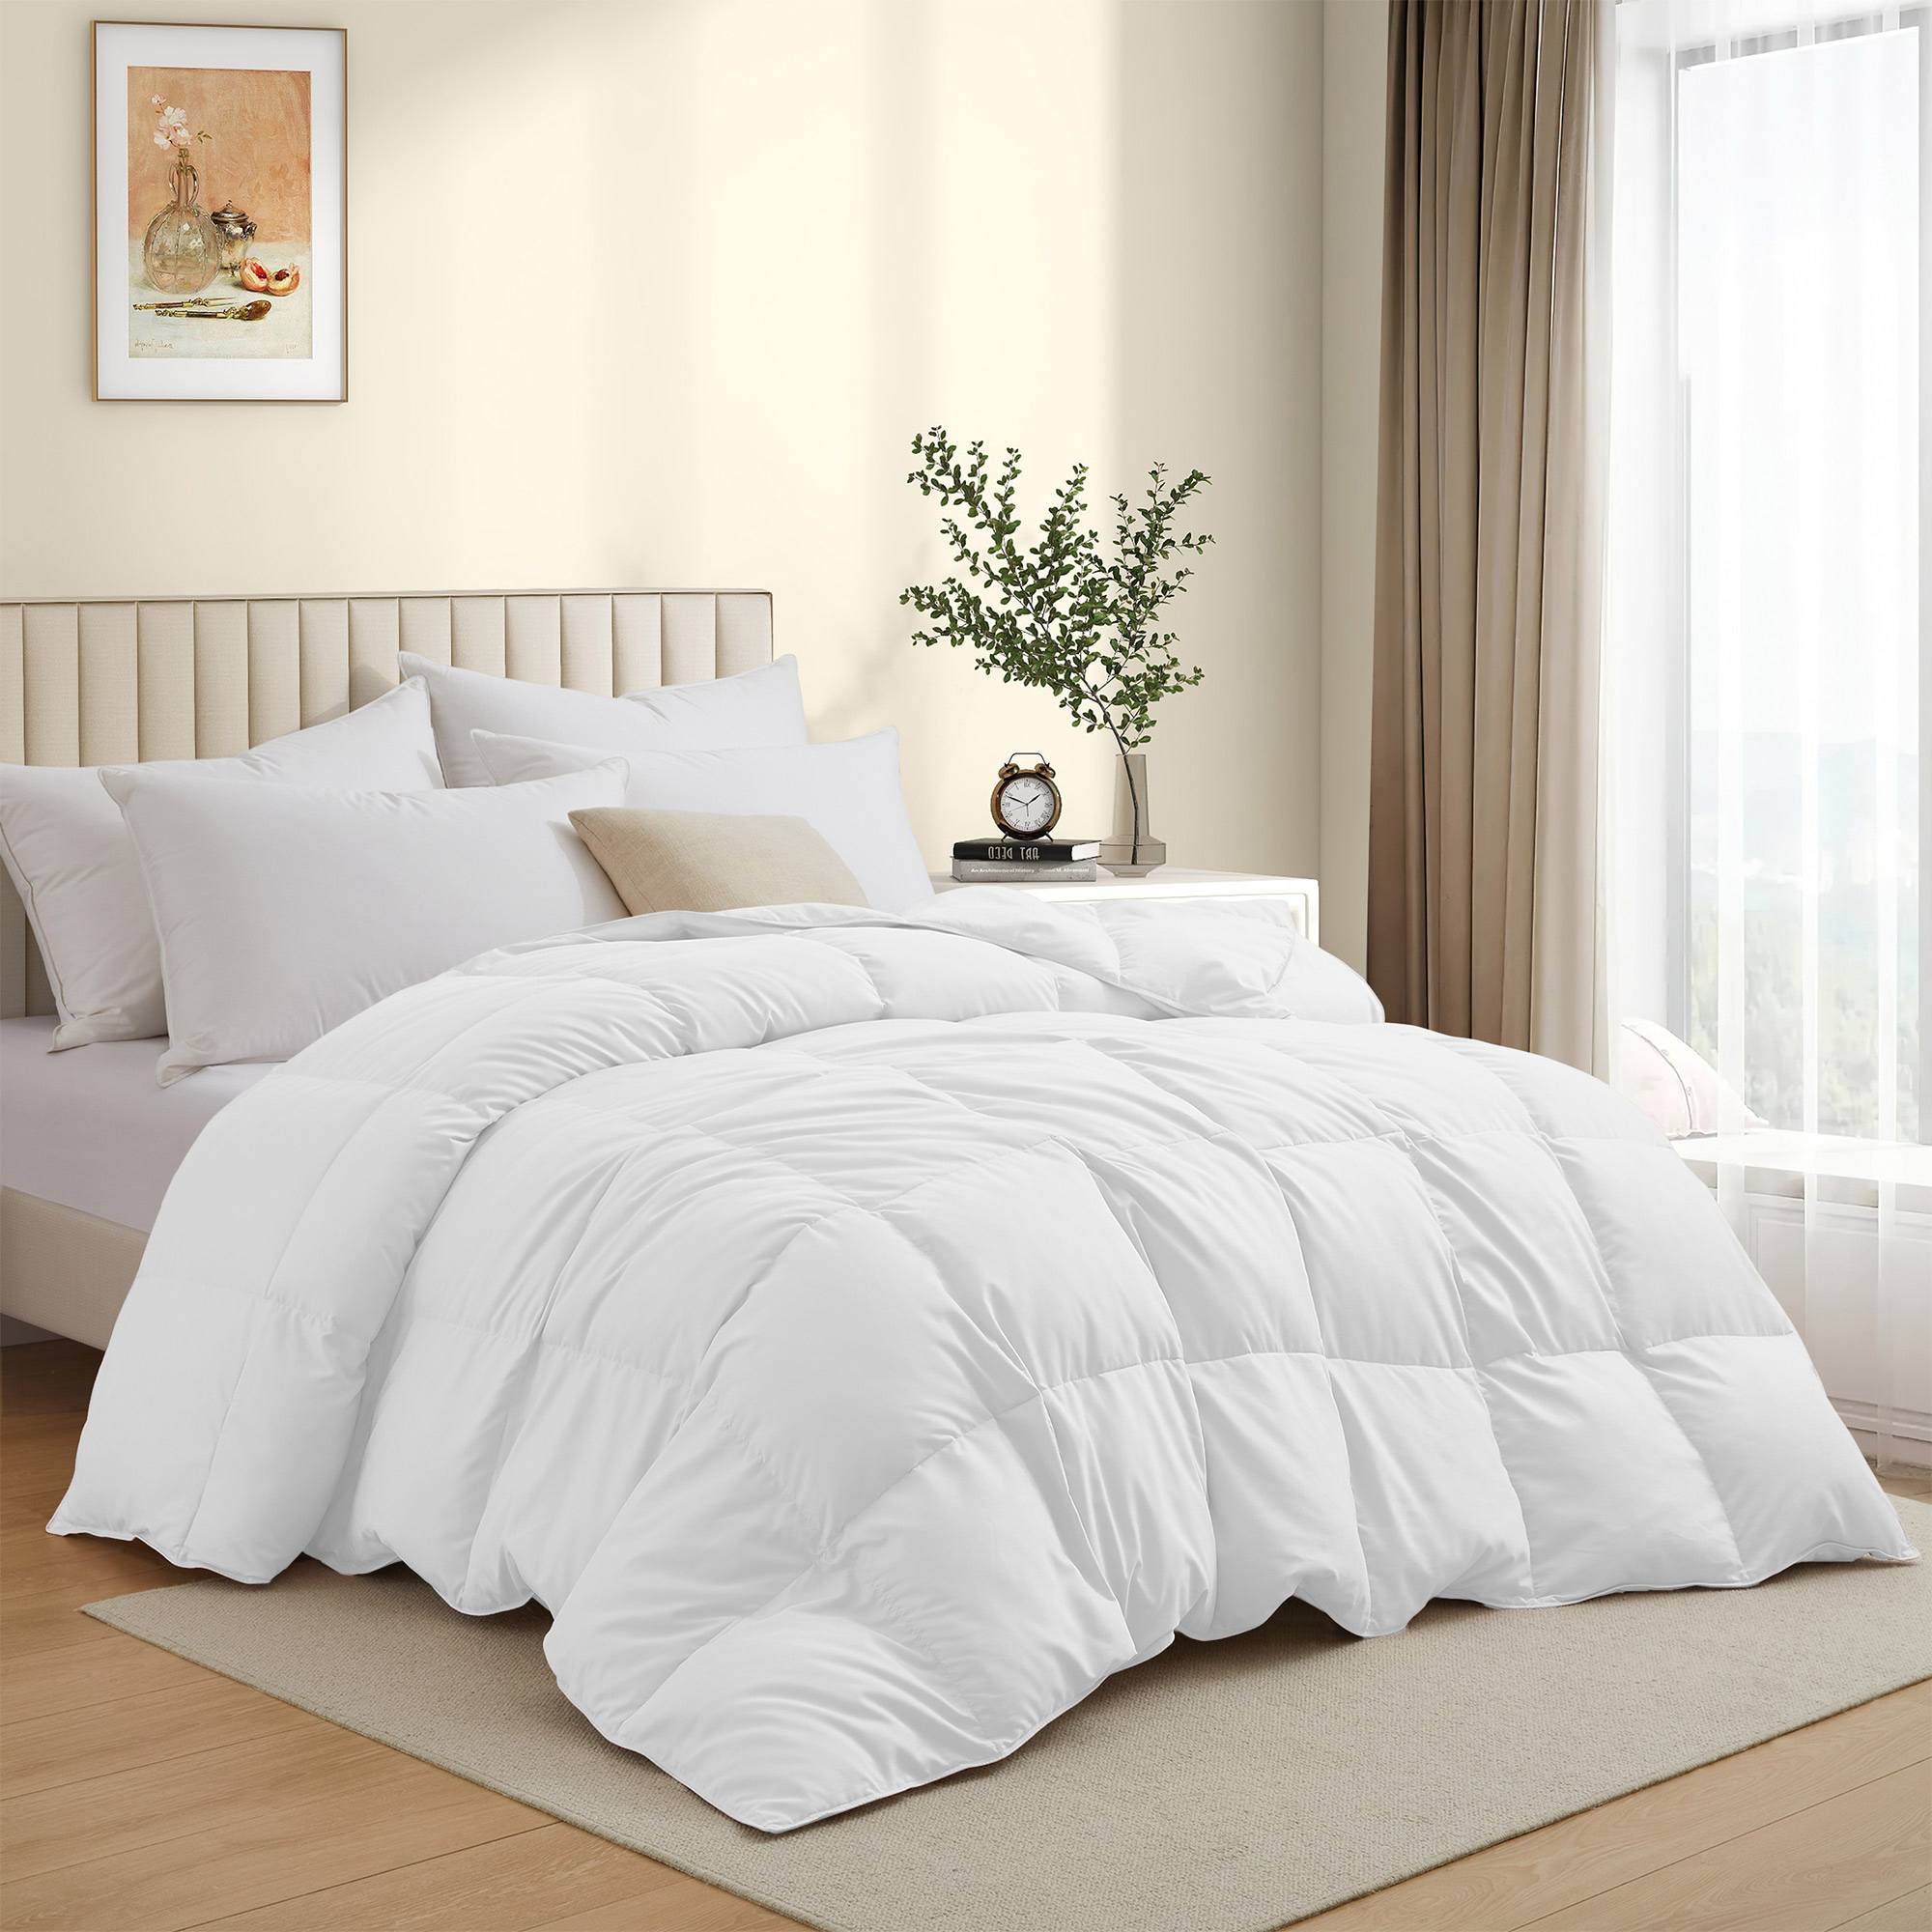 Basic Bedding Sets With All Season Goose Down Feather Comforter, 2 Pack Goose Down Pillows, Duvet Cover Set - White Bundles Option, Twin Siz